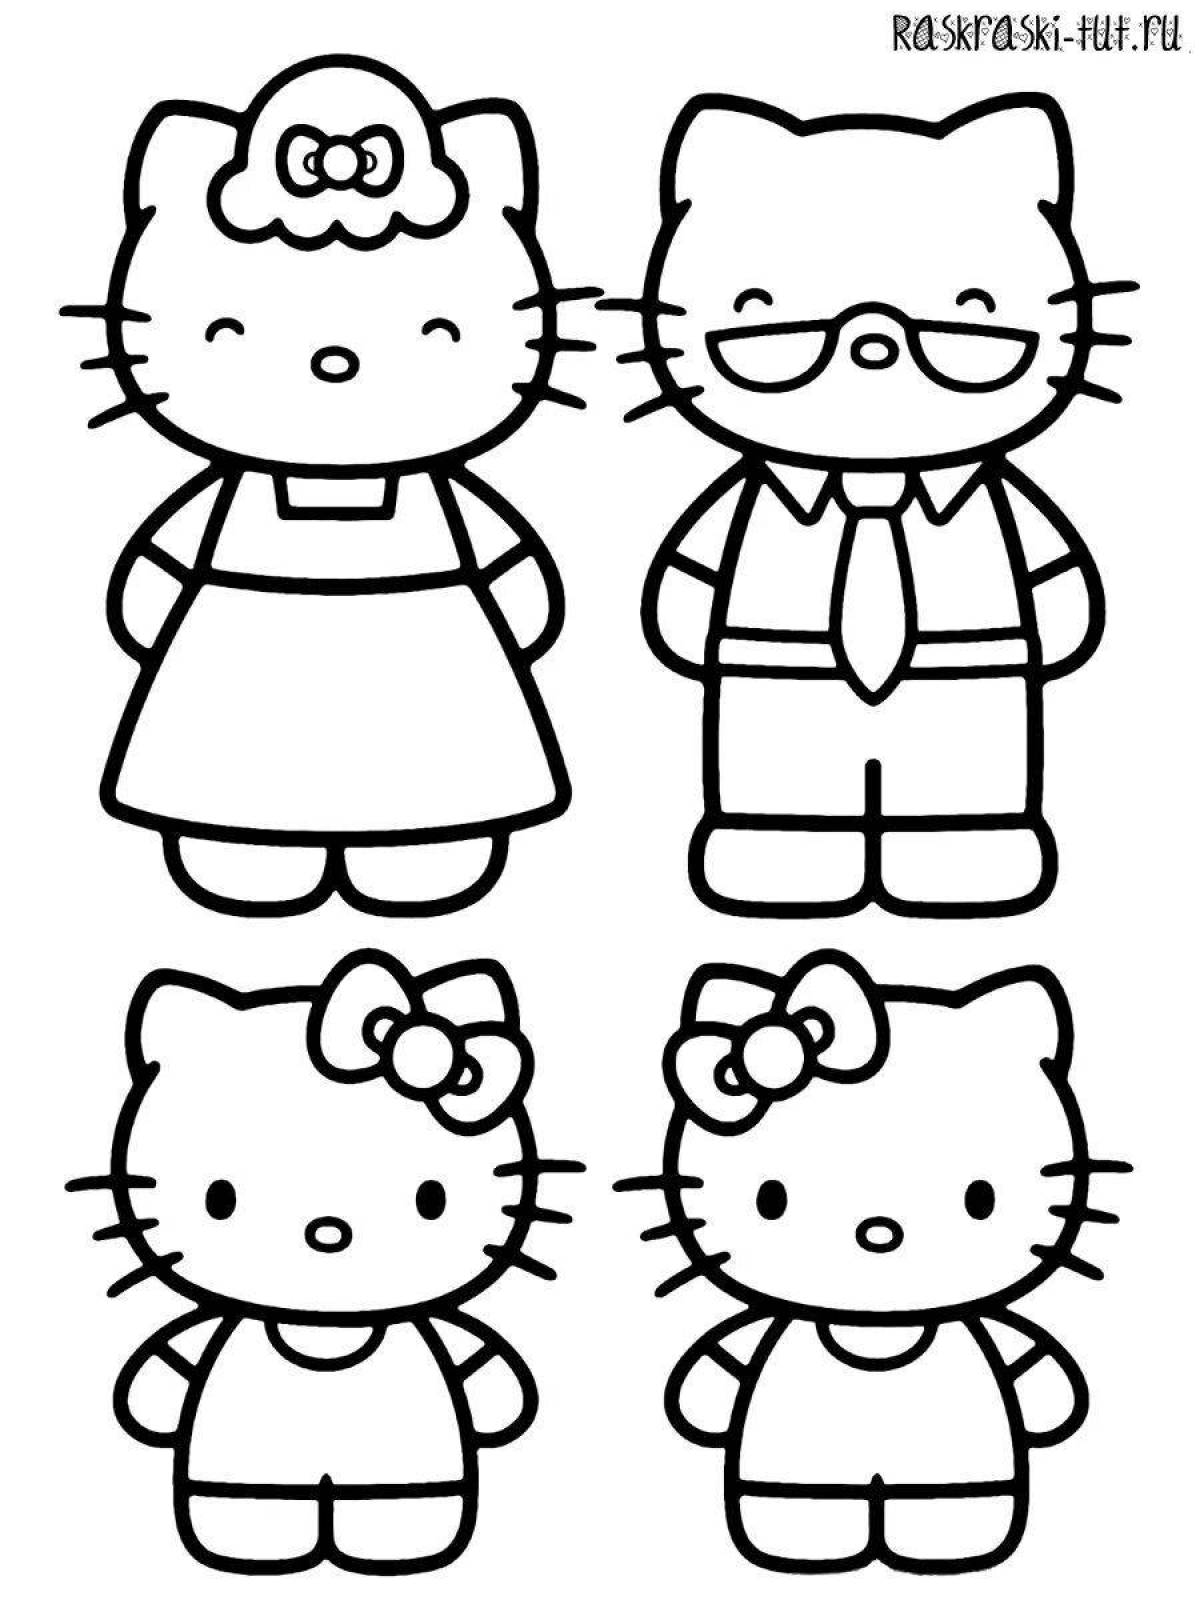 Playful hello kitty characters